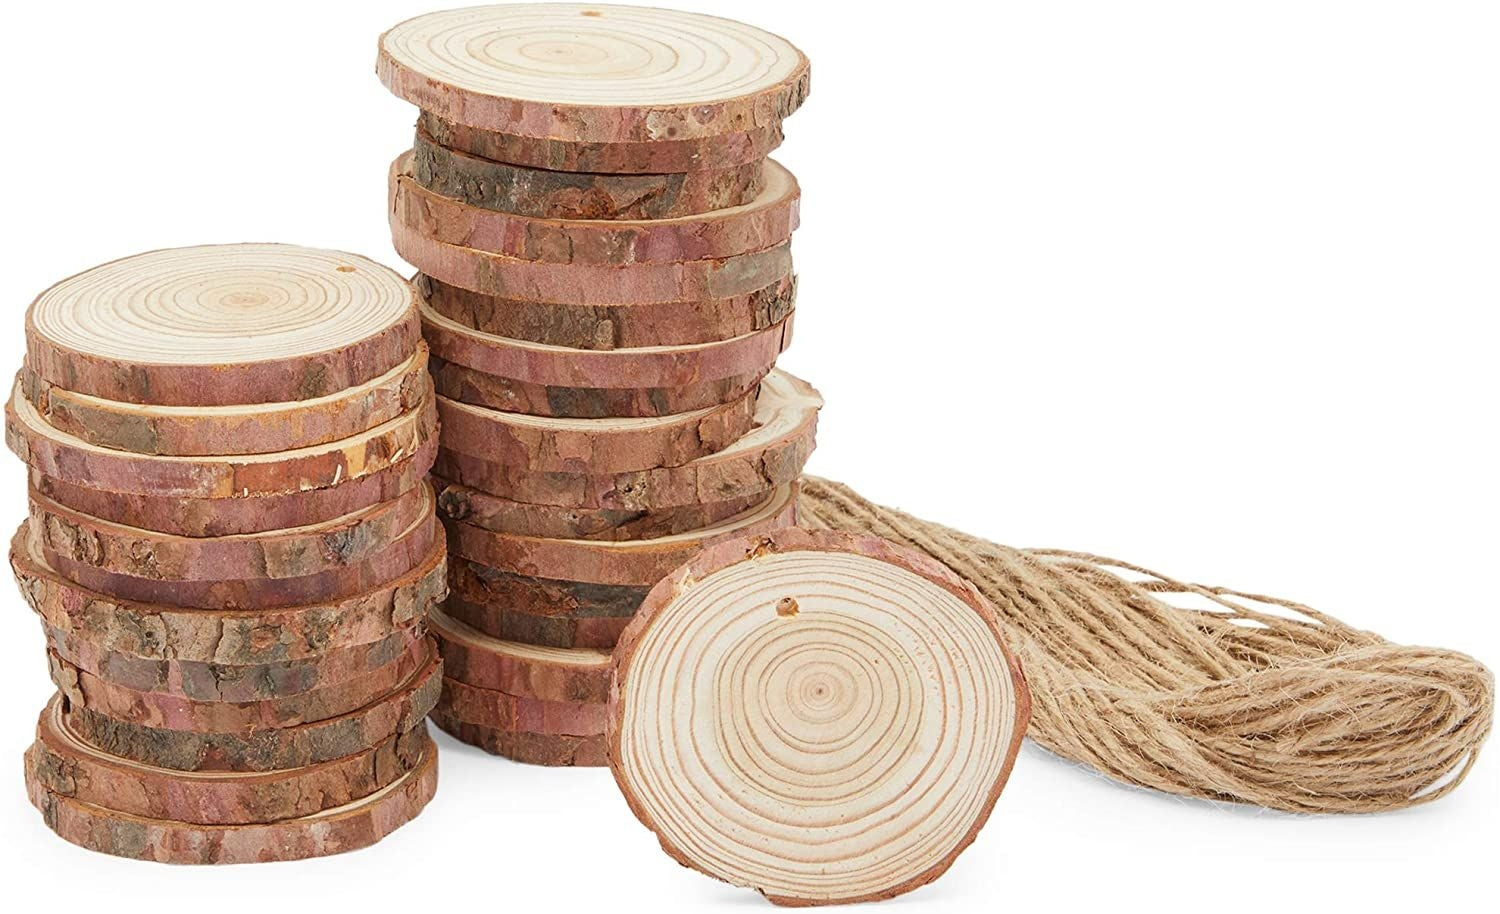 Bright Creations 30 Pack Natural Wood Slices for Crafts, Unfinished, 3.5-4 inch Diameter Discs, 0.4 Inches Thick